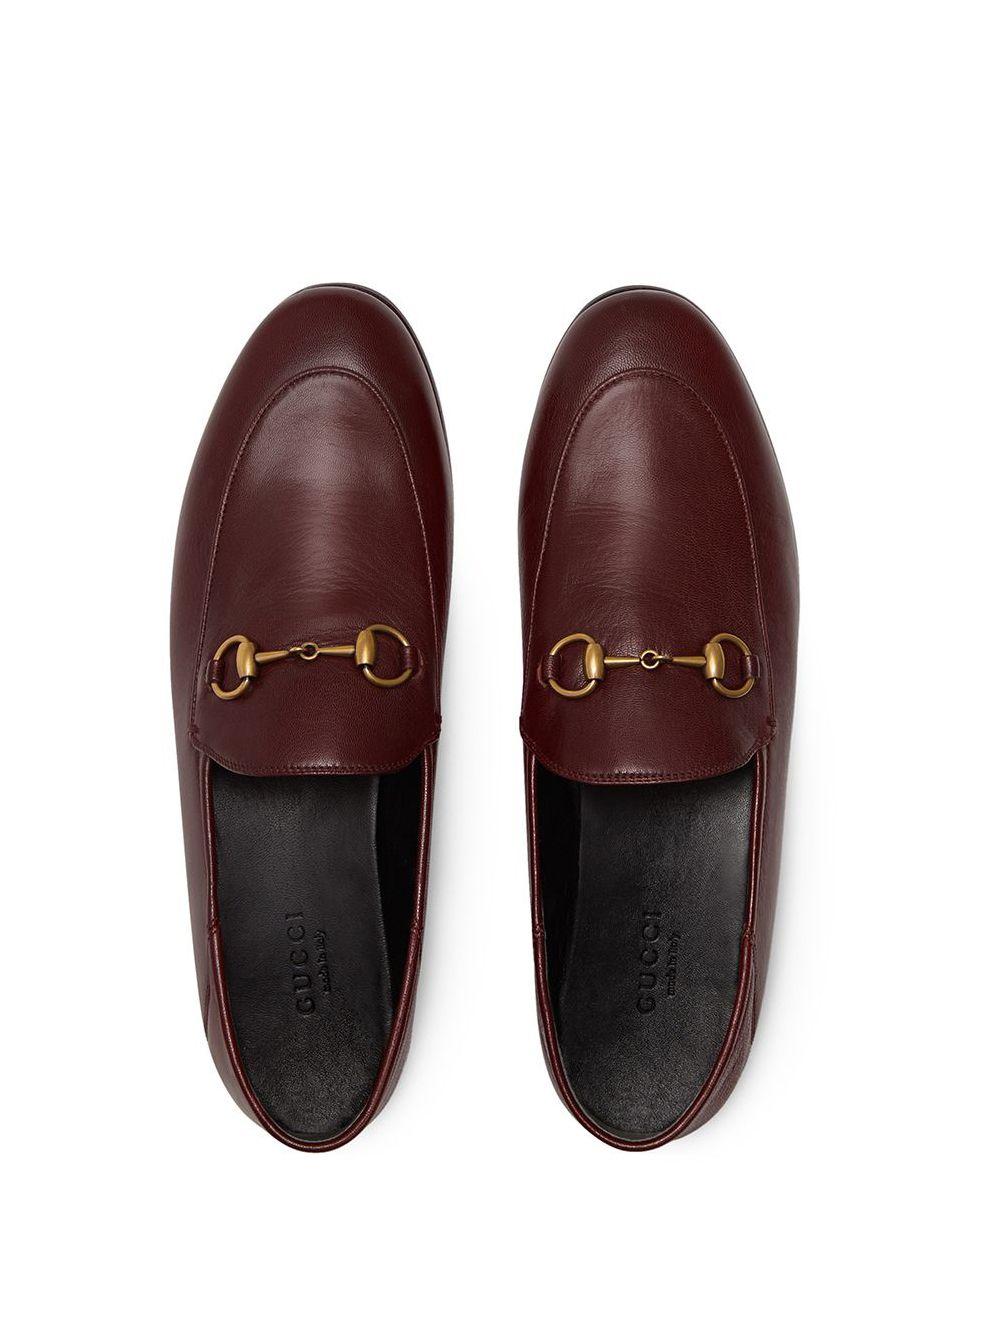 GUCCI ‘Marmont’ GG Womens Loafers Size 37.5/US 7.5 in Red Bordeaux Leather